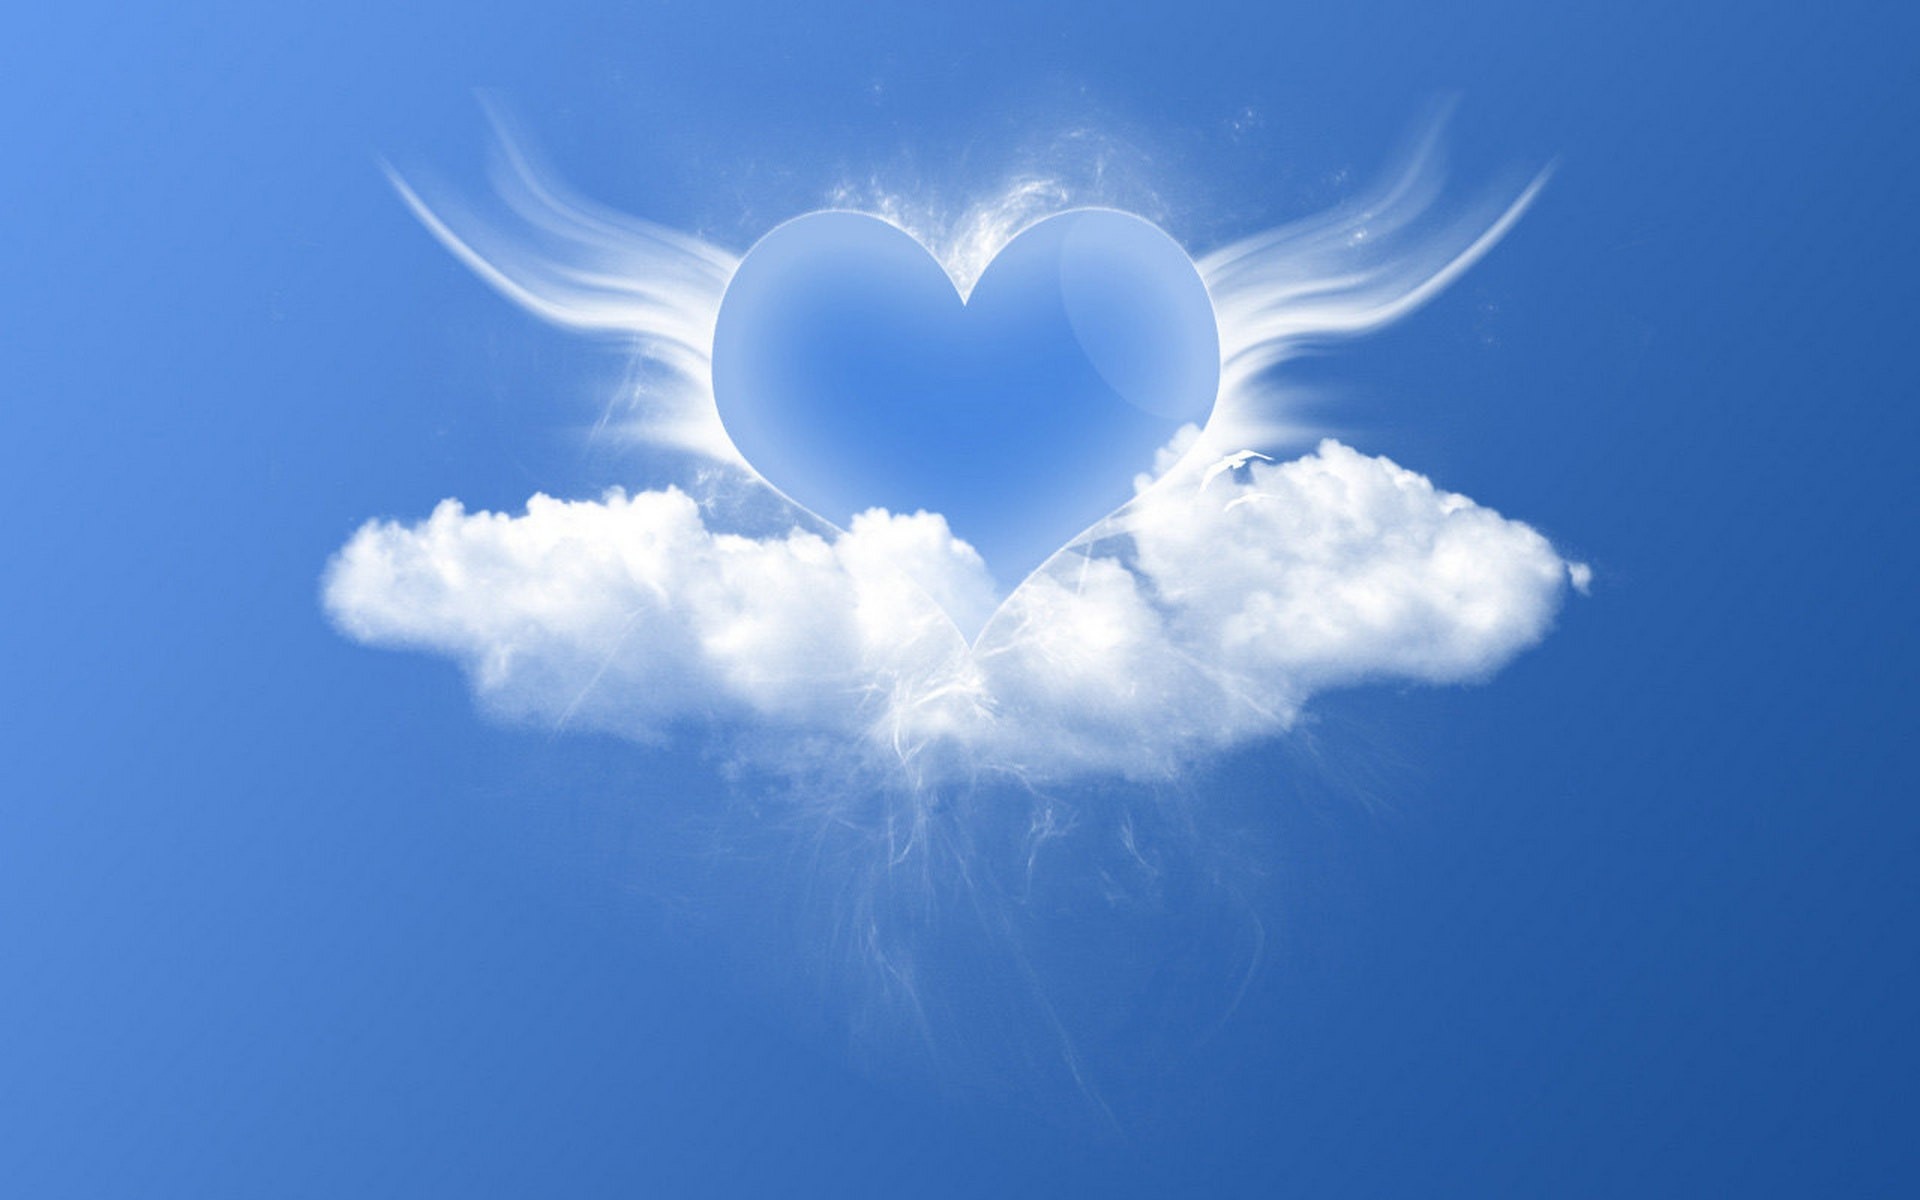 Hearts with wings, Romantic skyscape wallpaper, Love and freedom, Symbol of affection, 1920x1200 HD Desktop